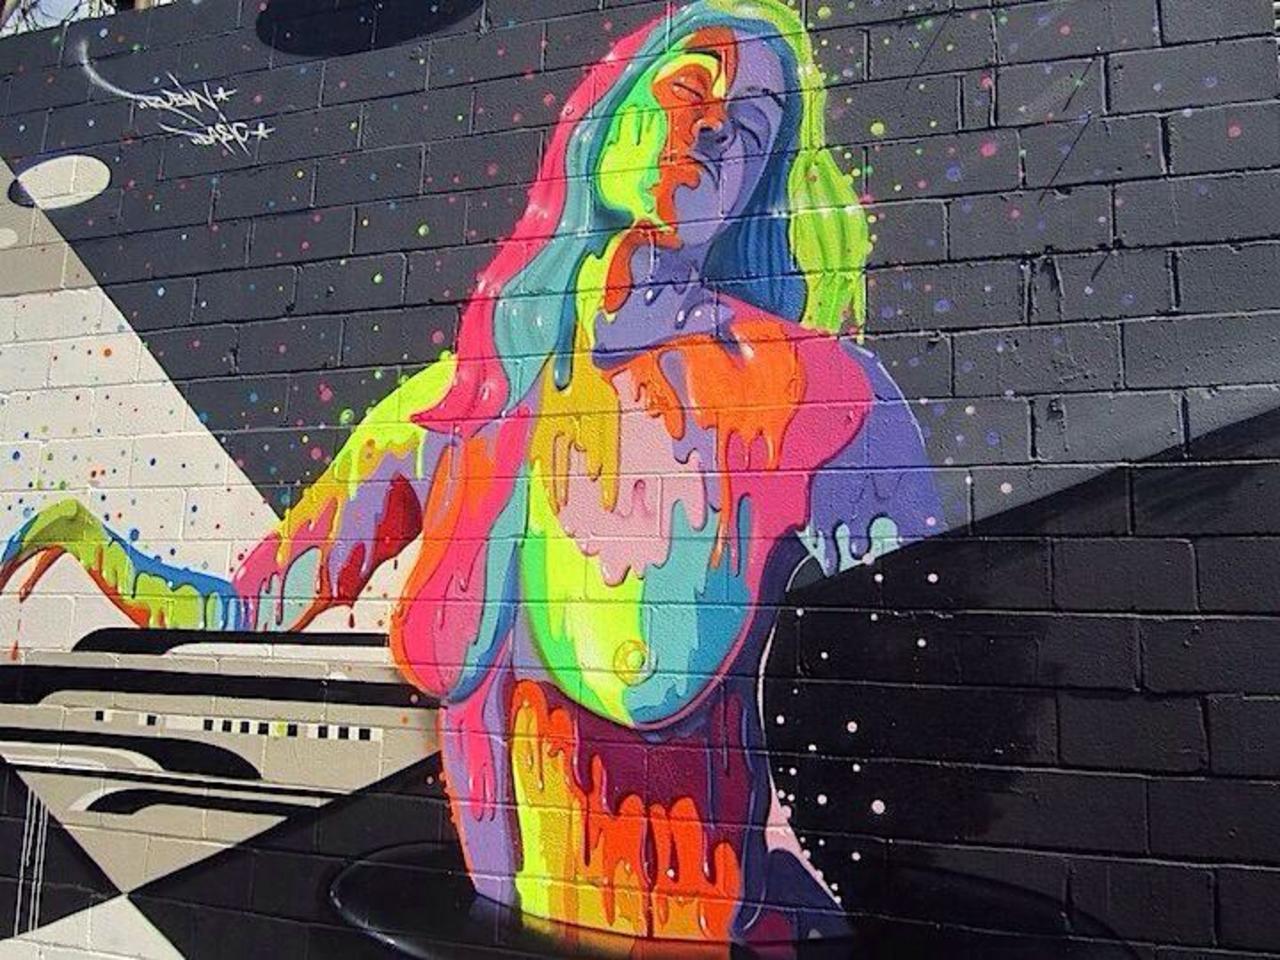 4 different unique & surreal yet brilliant Street Art pieces from Dasic in NYC #art #graffiti #mural #streetart http://t.co/VIwyVDeUxg